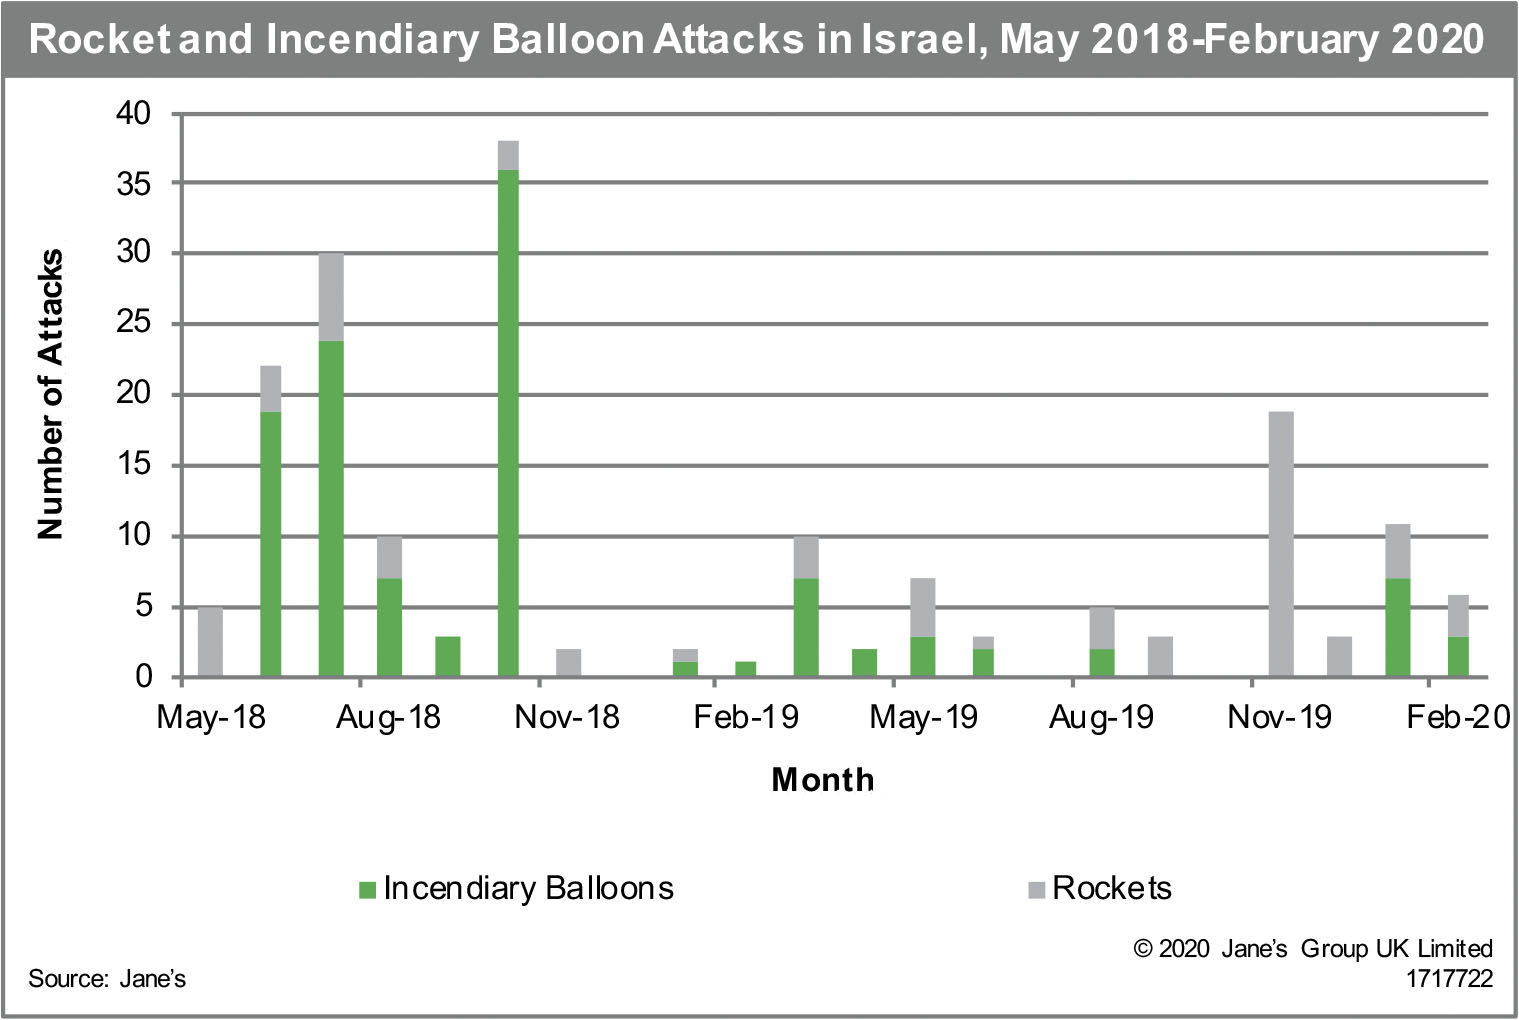 Rocket and incendiary balloon attacks in Israel, May 2018 – February 2020. (©2020 Jane’s Group UK)